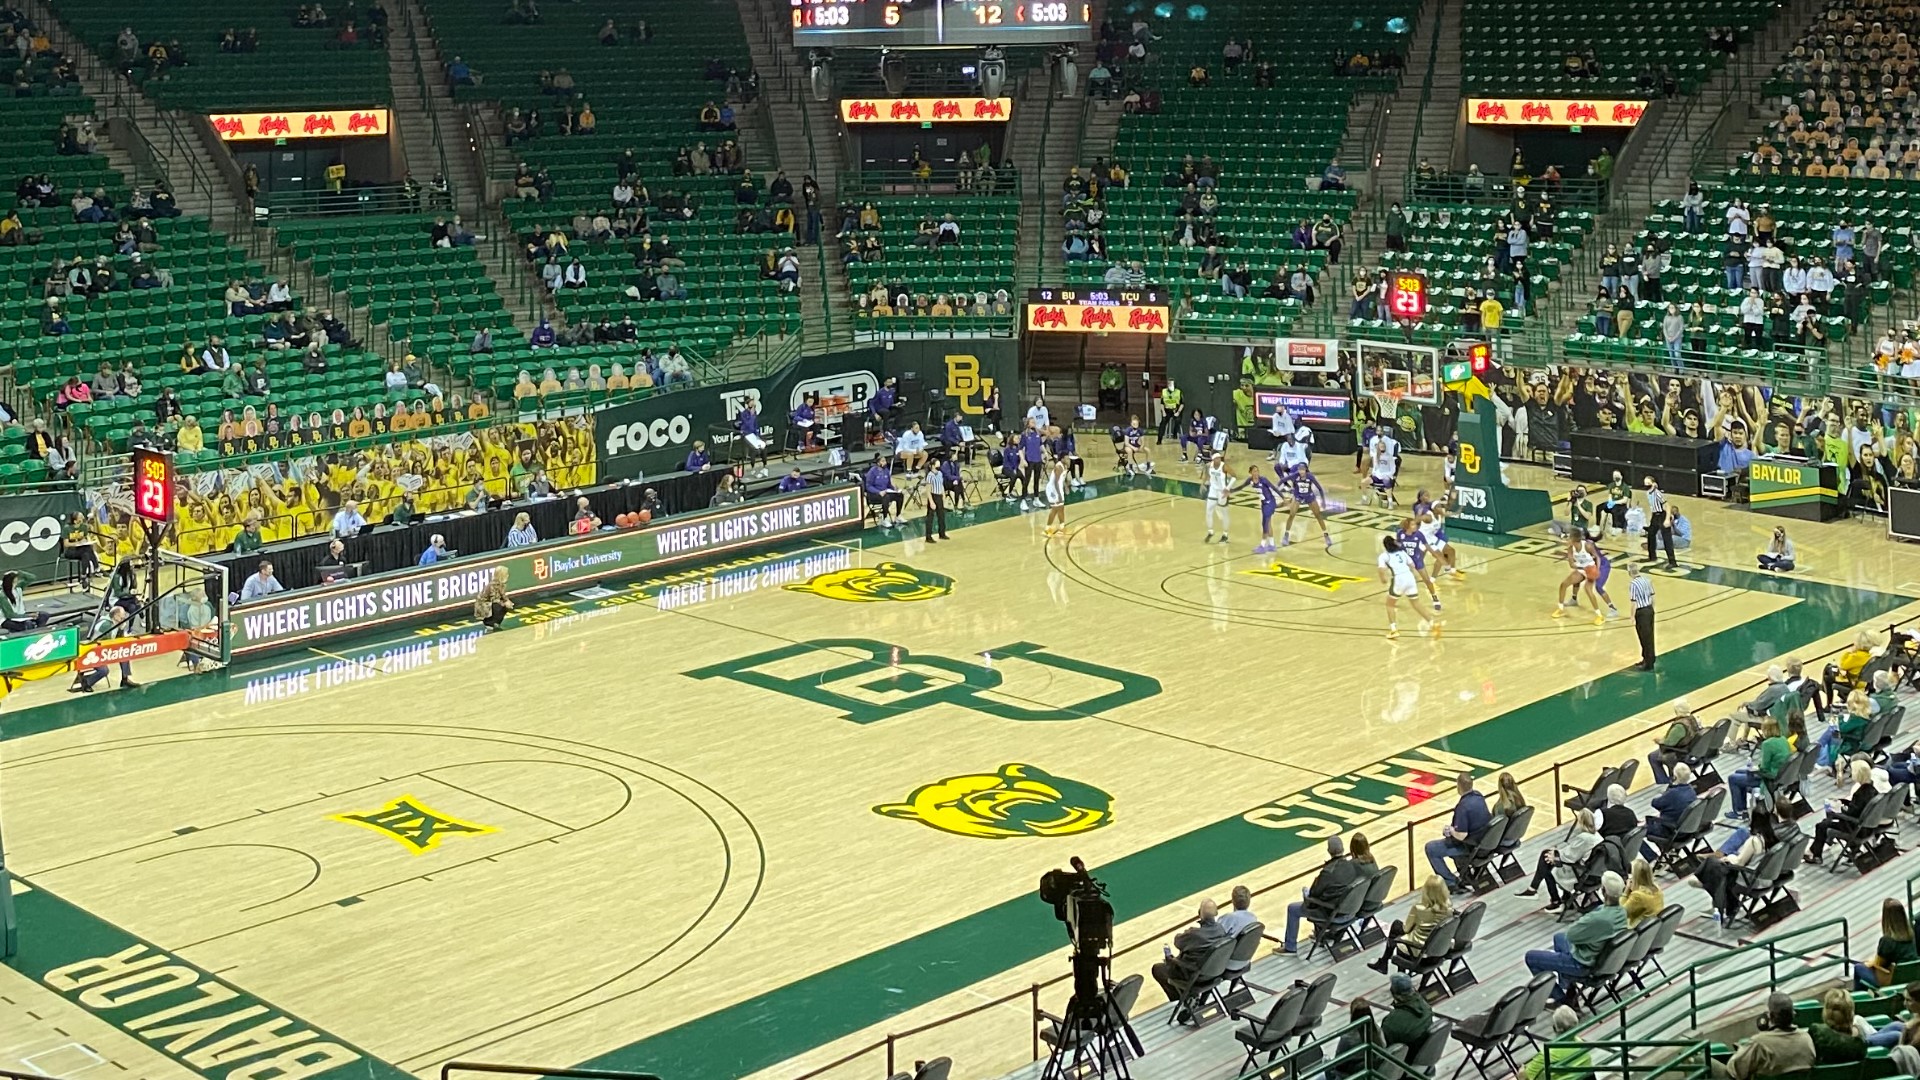 The Bears are back in action at the Ferrell Center taking on a struggling K-State team.